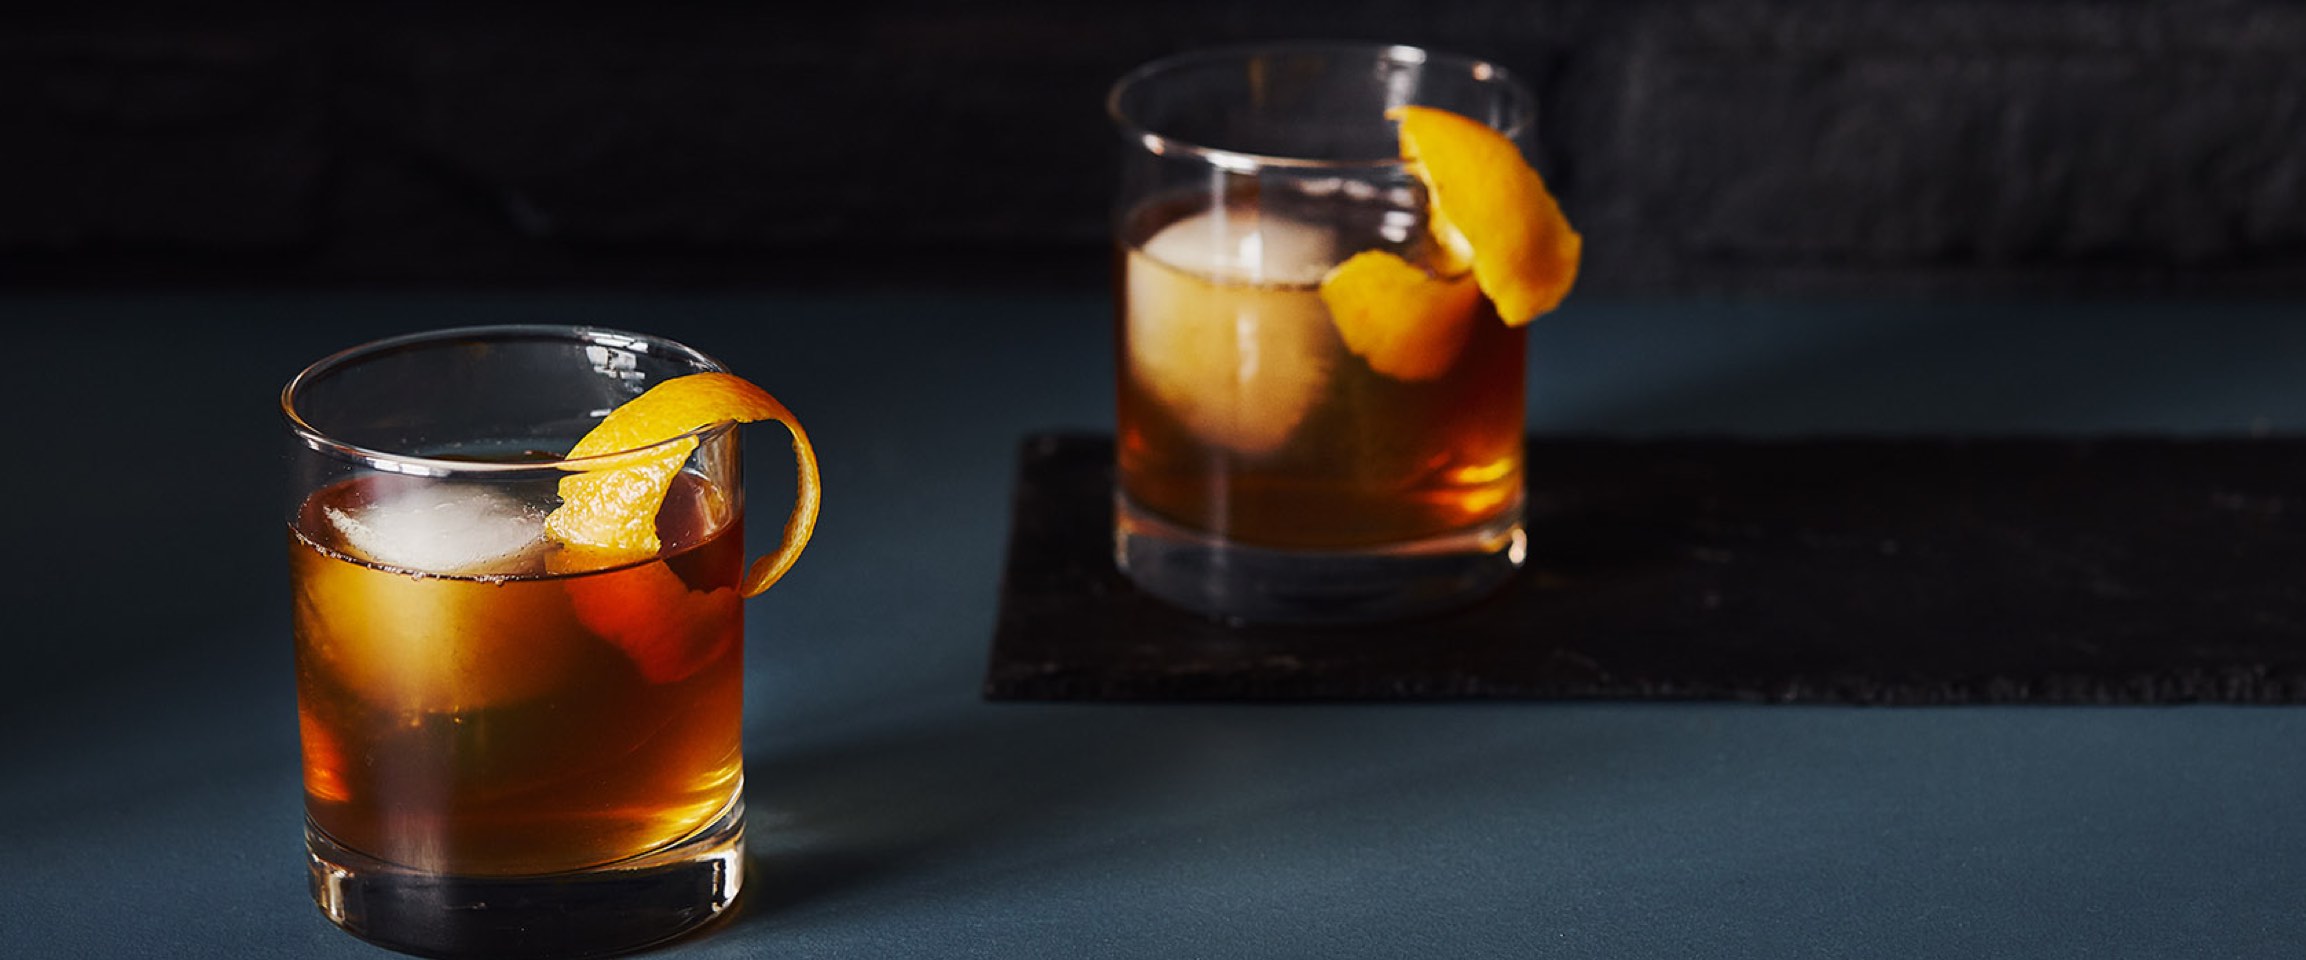 2 clear glasses with Manhattan cocktail, ice and orange peel.